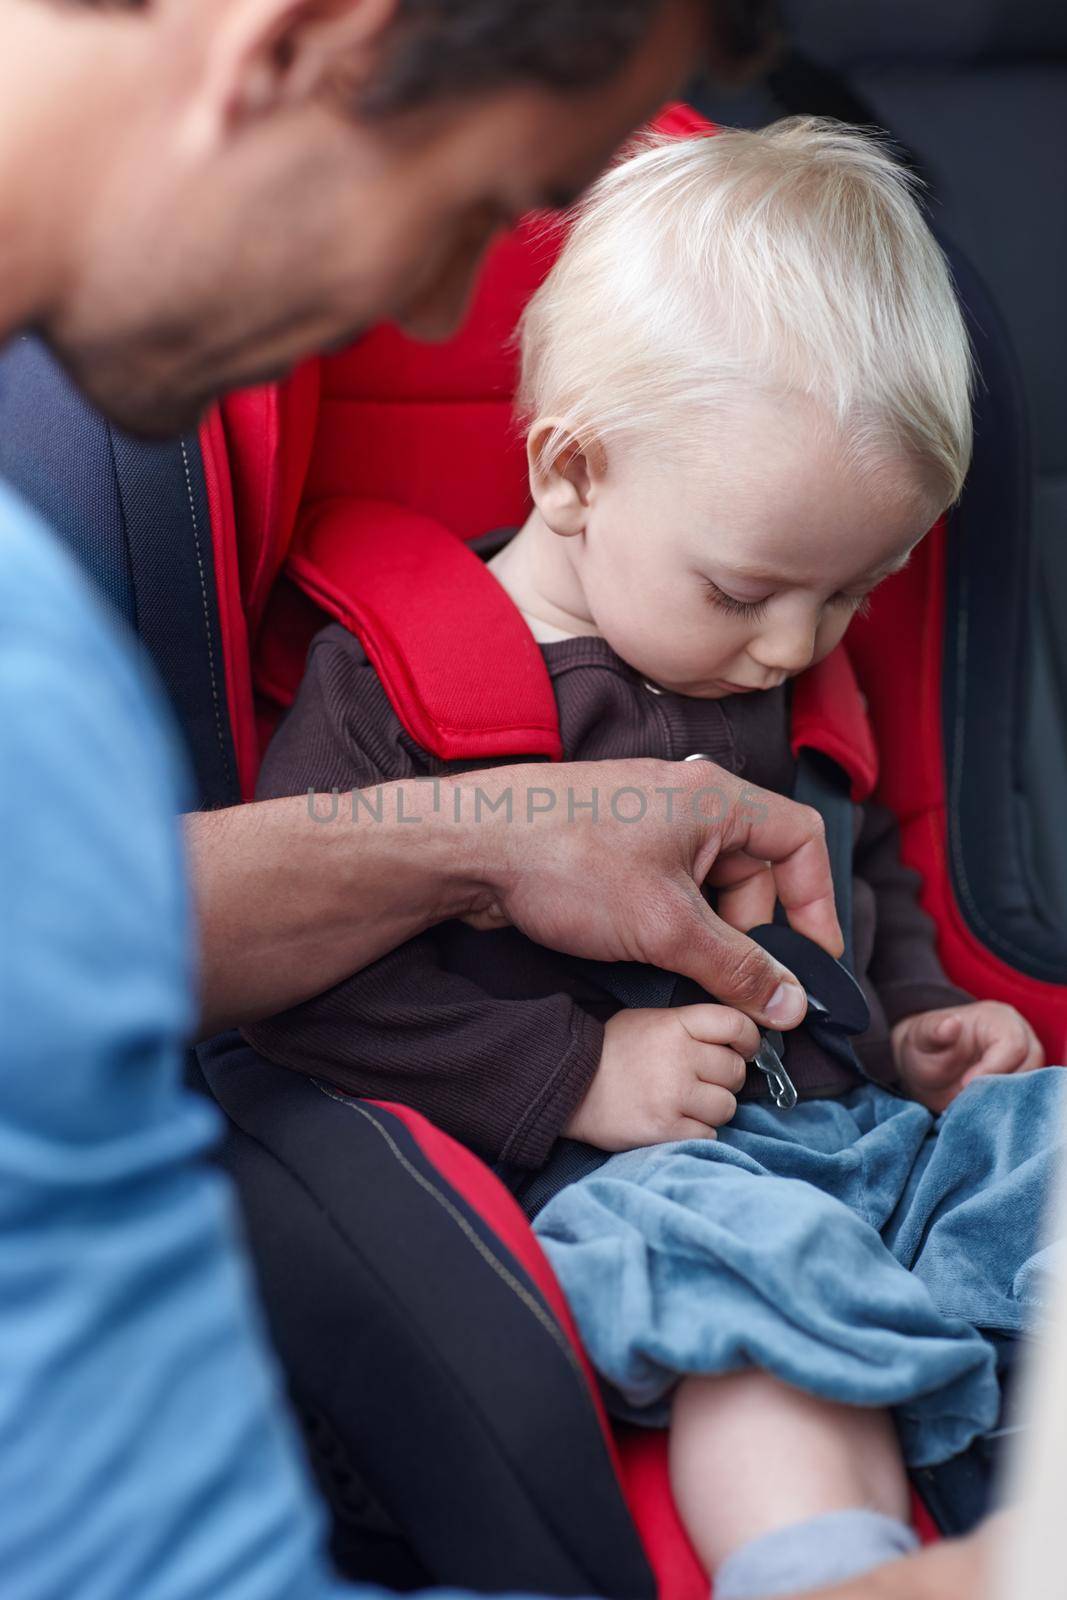 A father helping his child in a baby seat for the car.